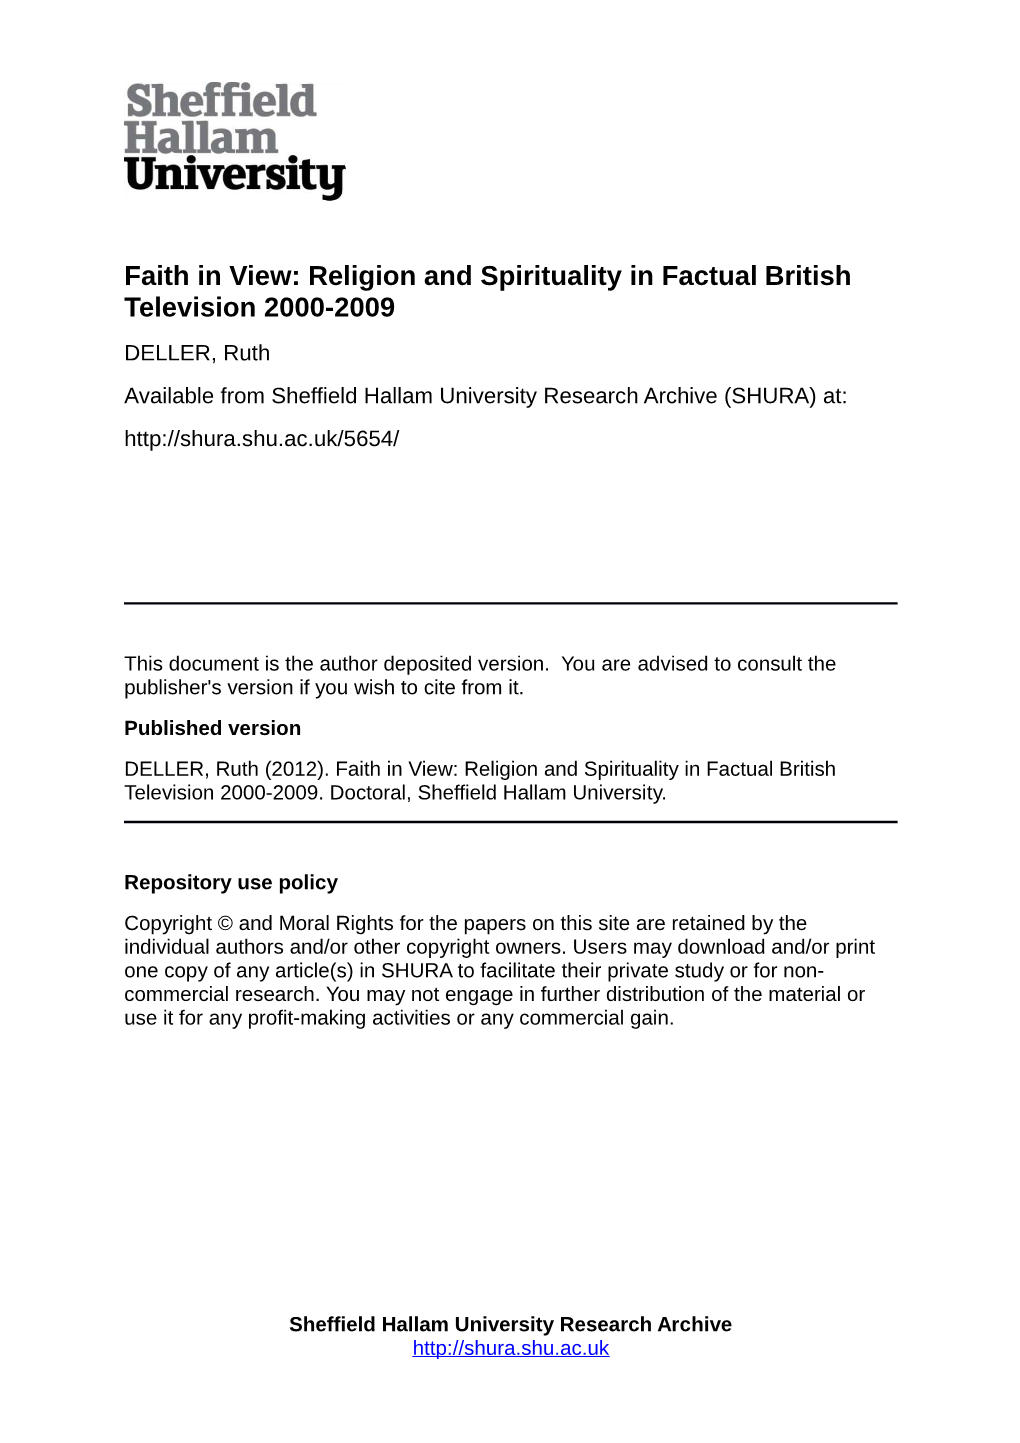 Faith in View: Religion and Spirituality in Factual British Television 2000